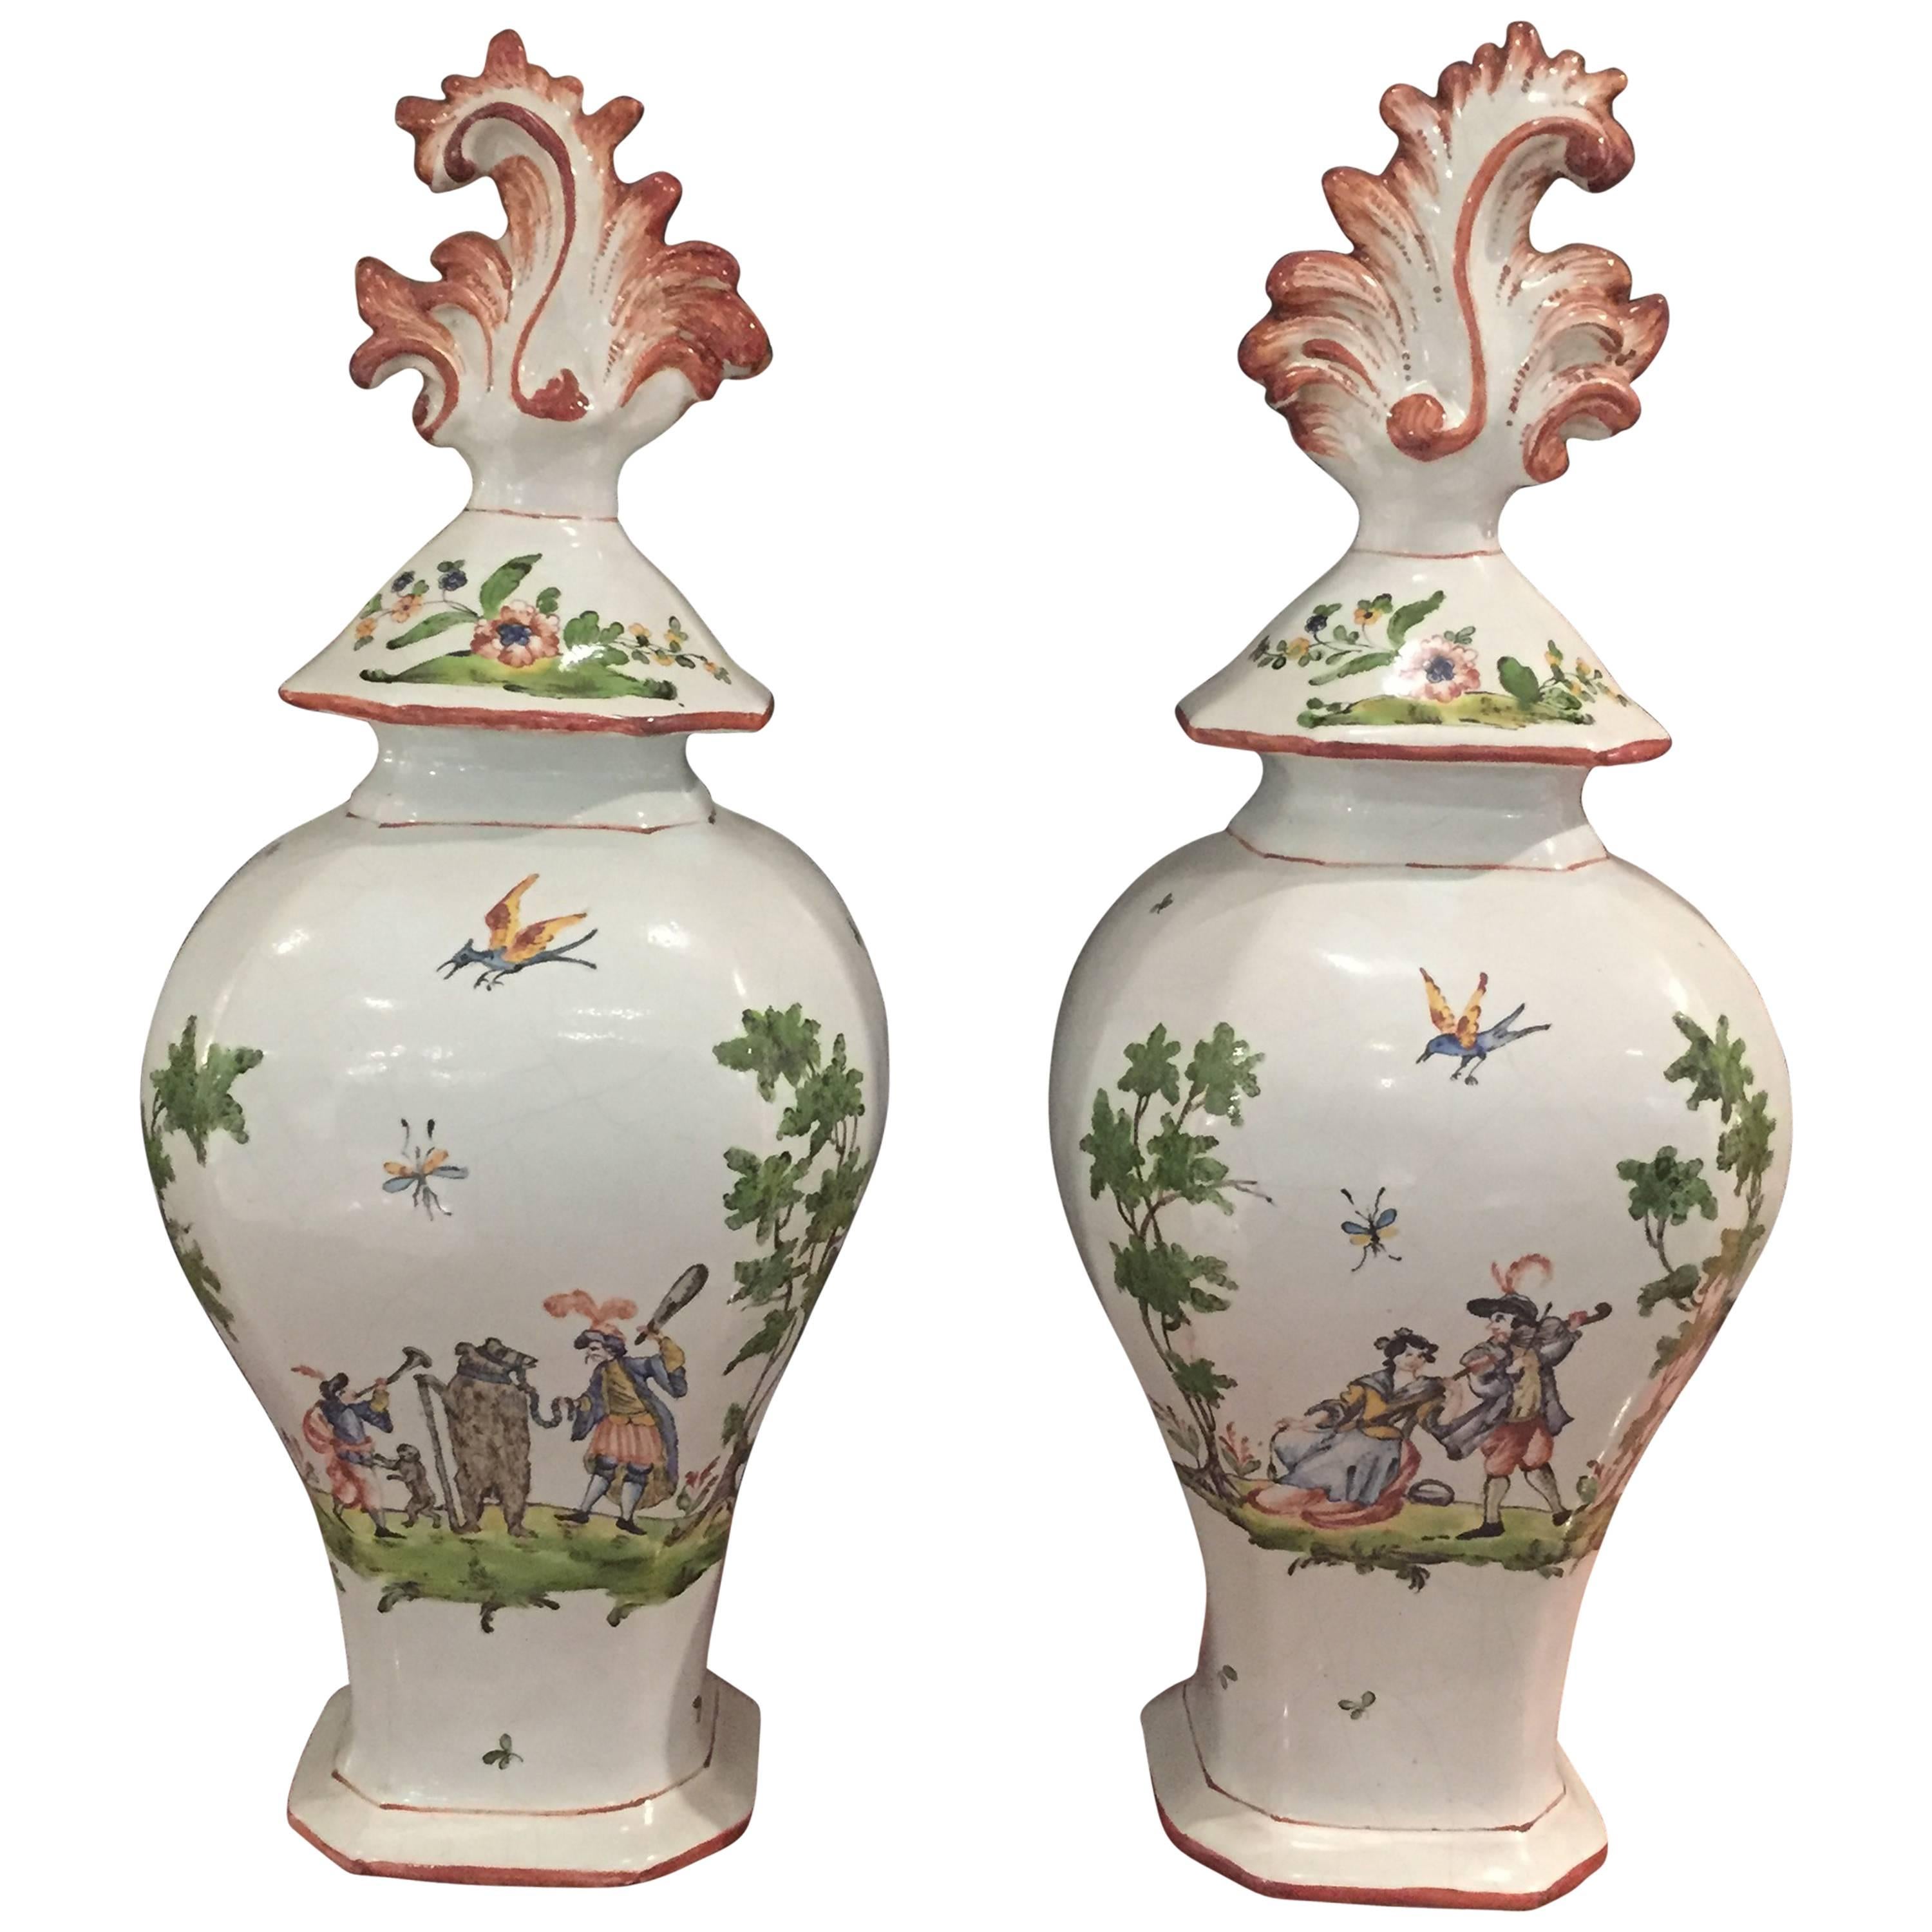 Pair of Italian Faience Covered Vases of Baluster Form with Charming Scenes